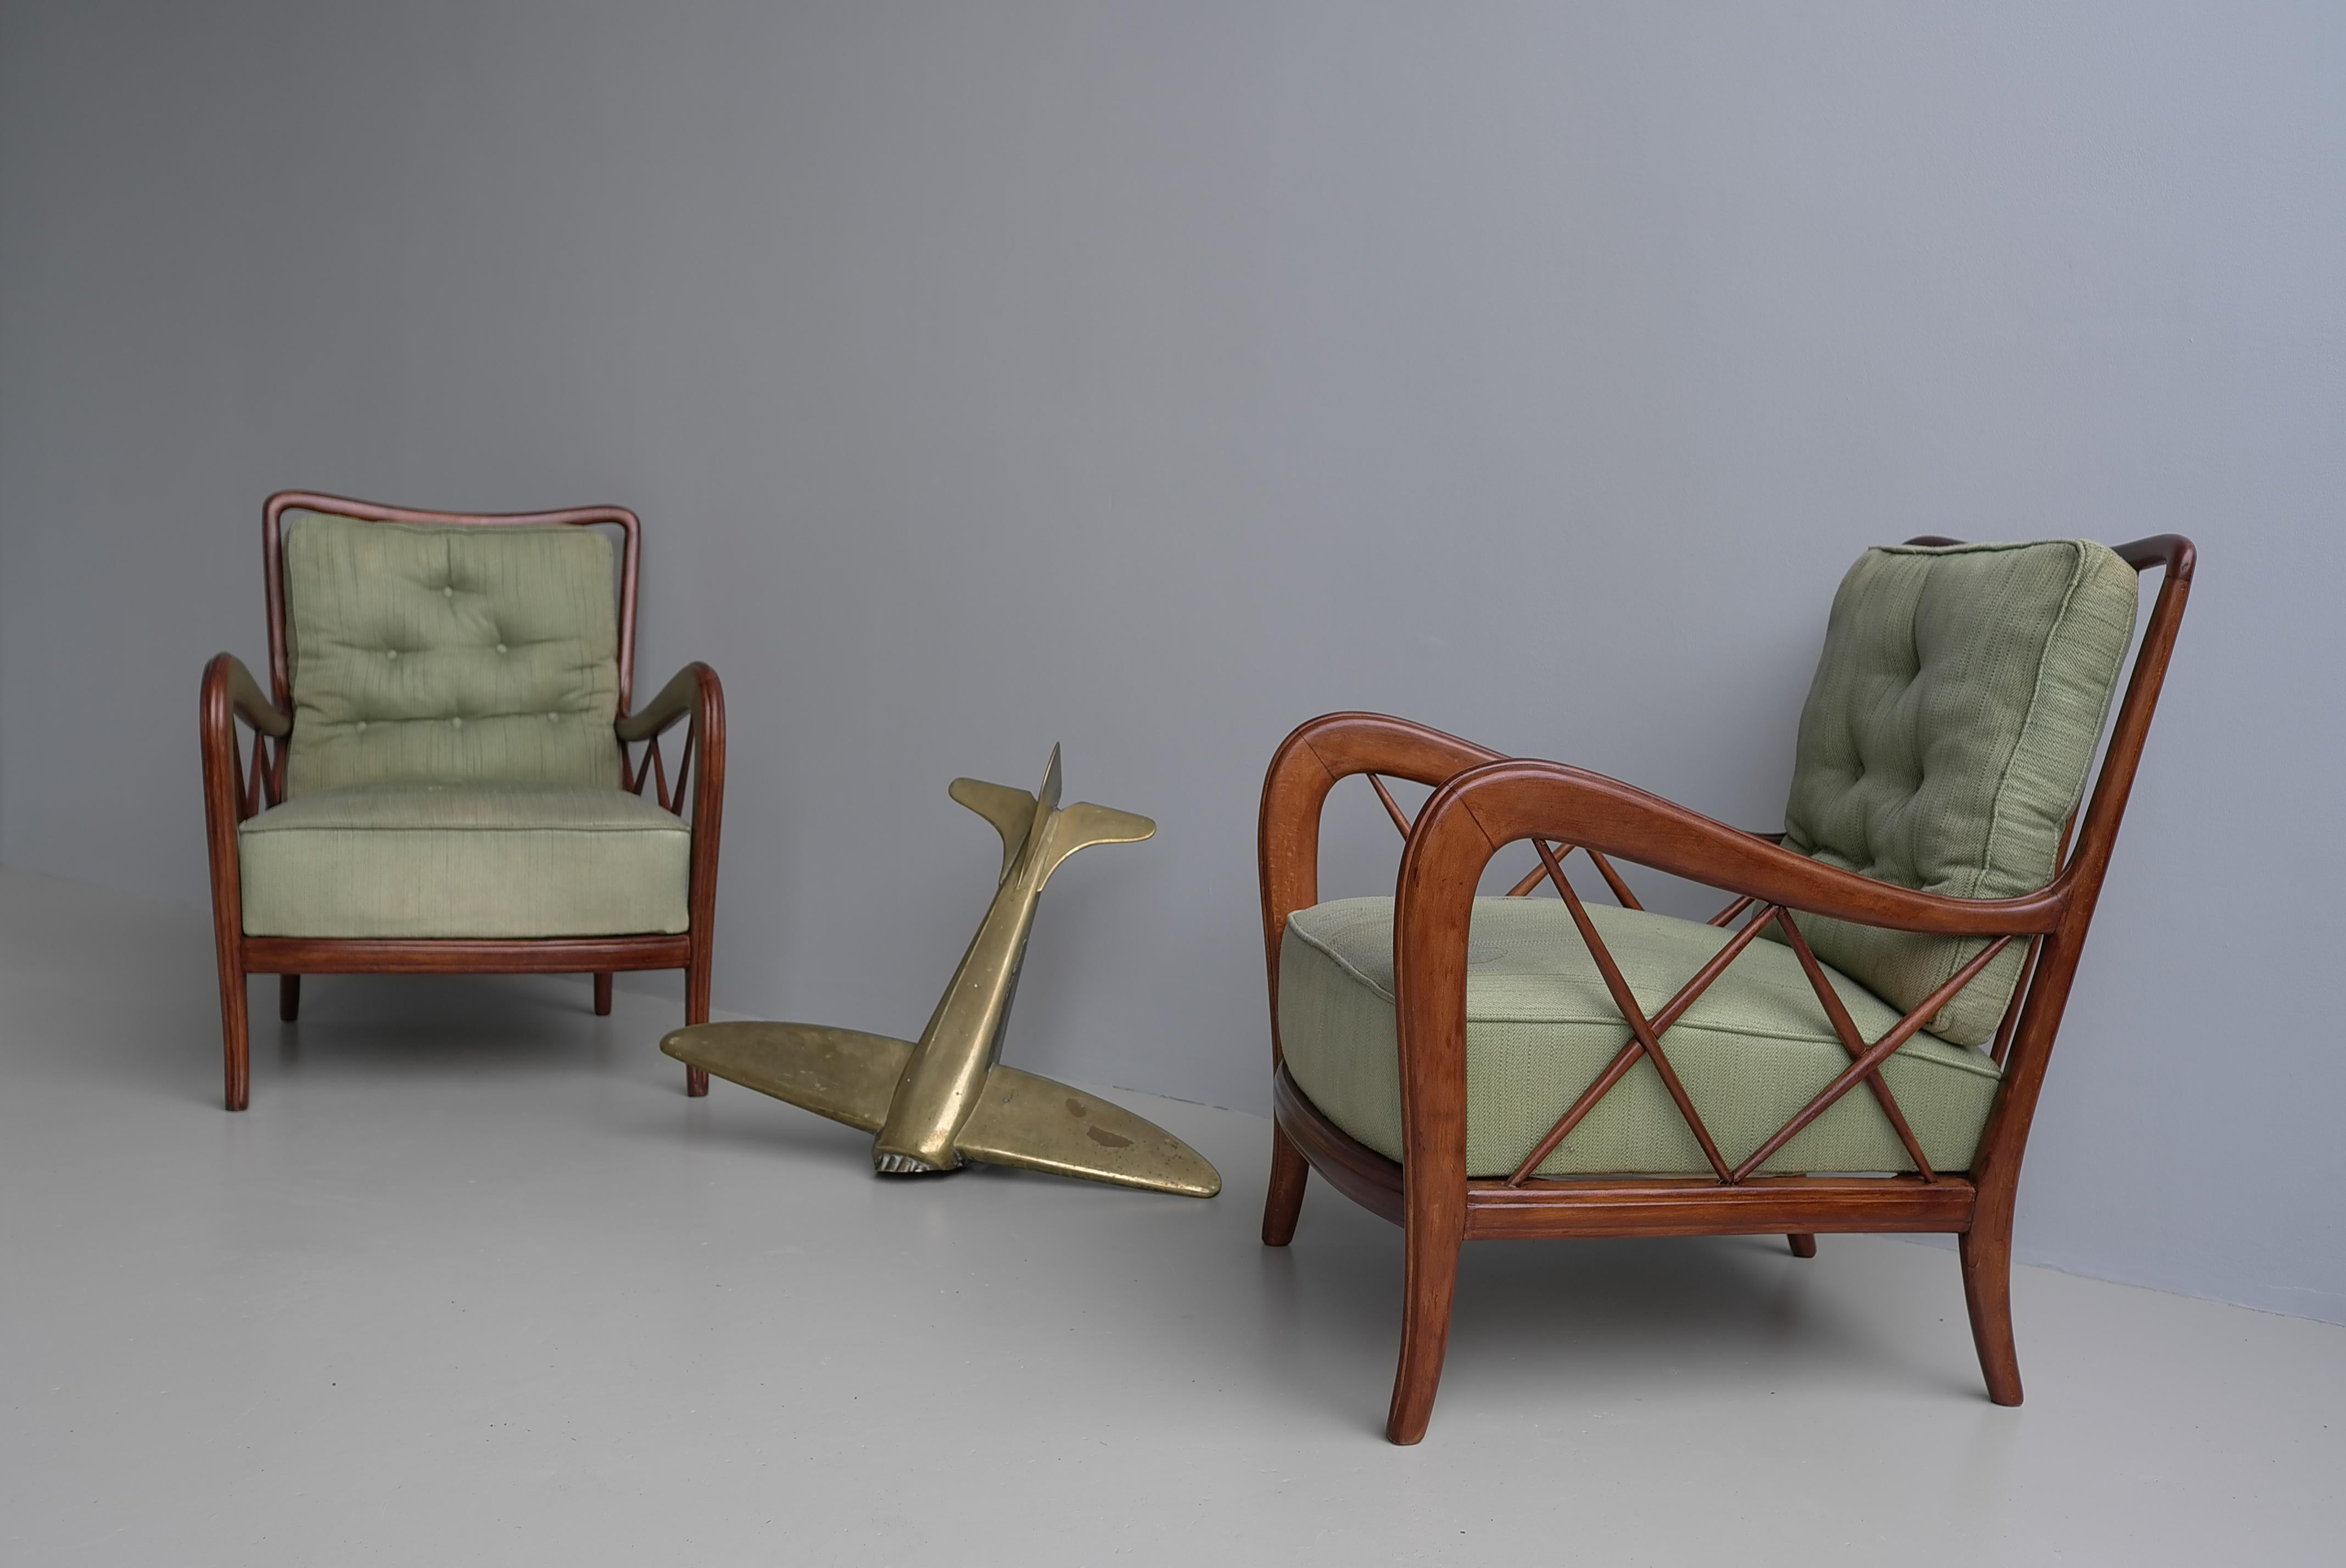 Walnut Wooden Lounge Chairs attr Paolo Buffa, Milan Italy 1940's For Sale 3